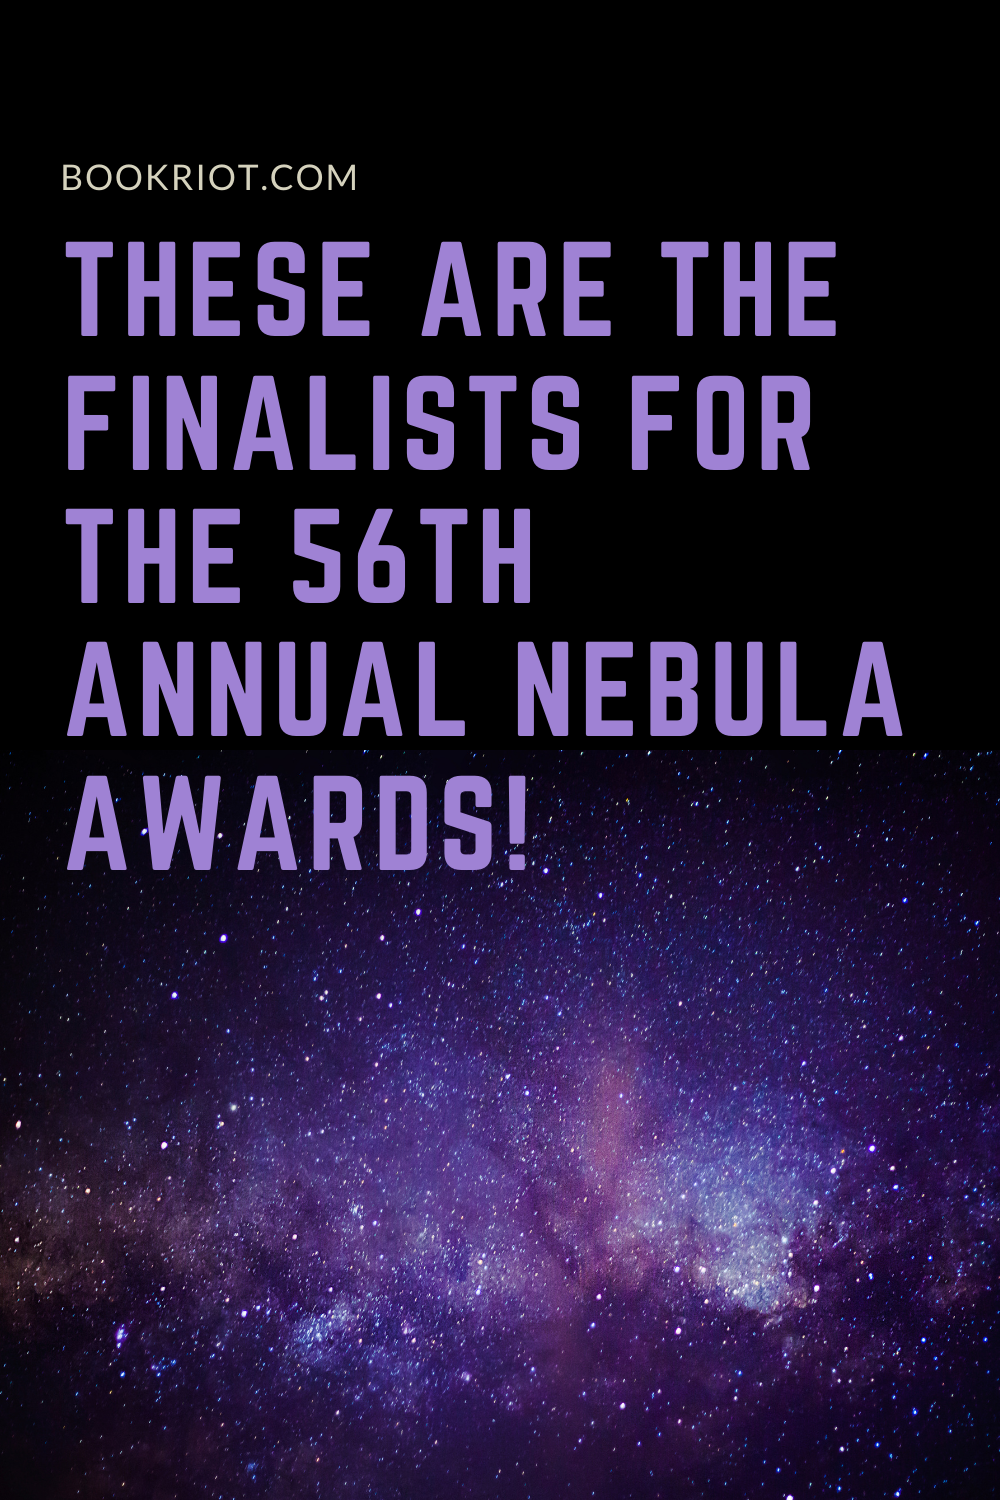 These Are the Finalists for the 56th Annual Nebula Awards